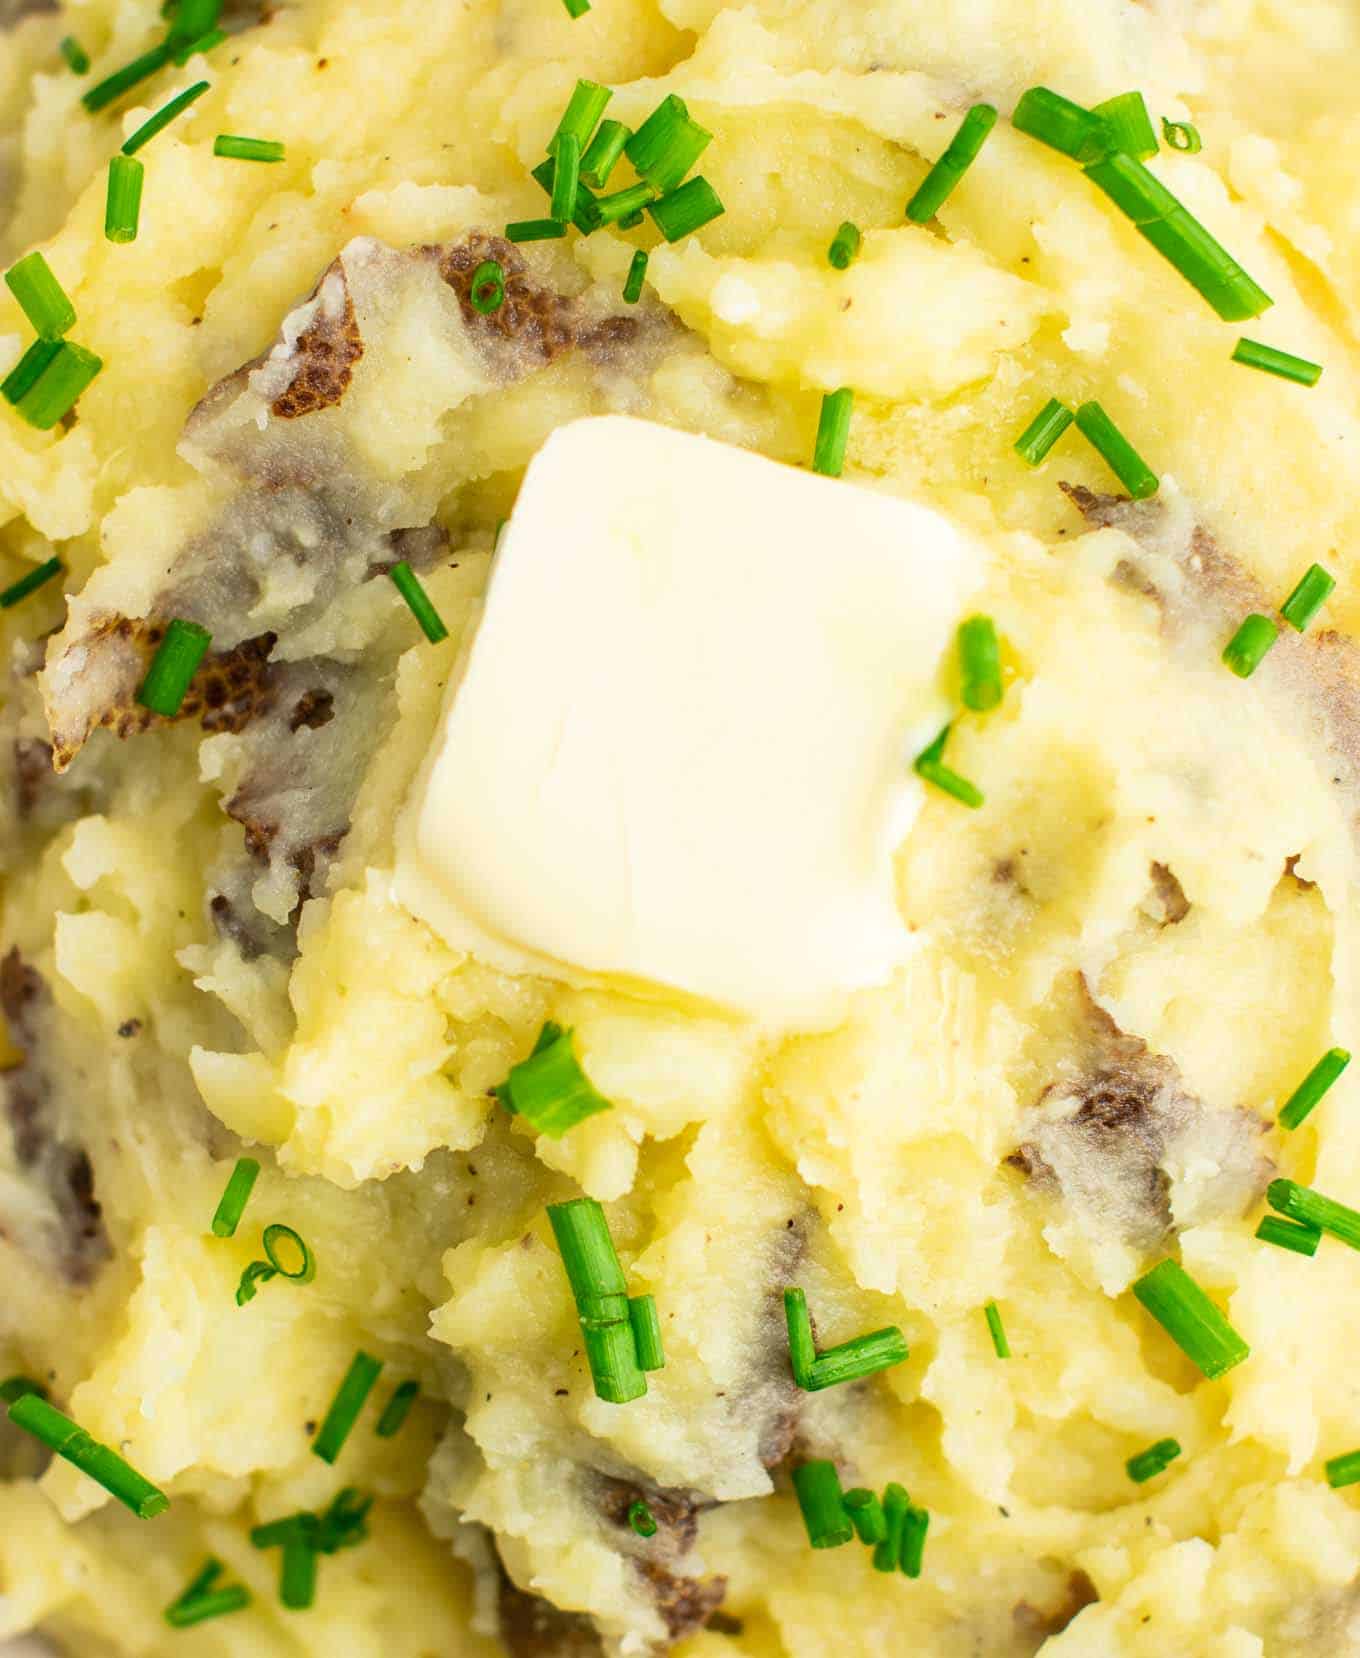 mashed potatoes with butter on top